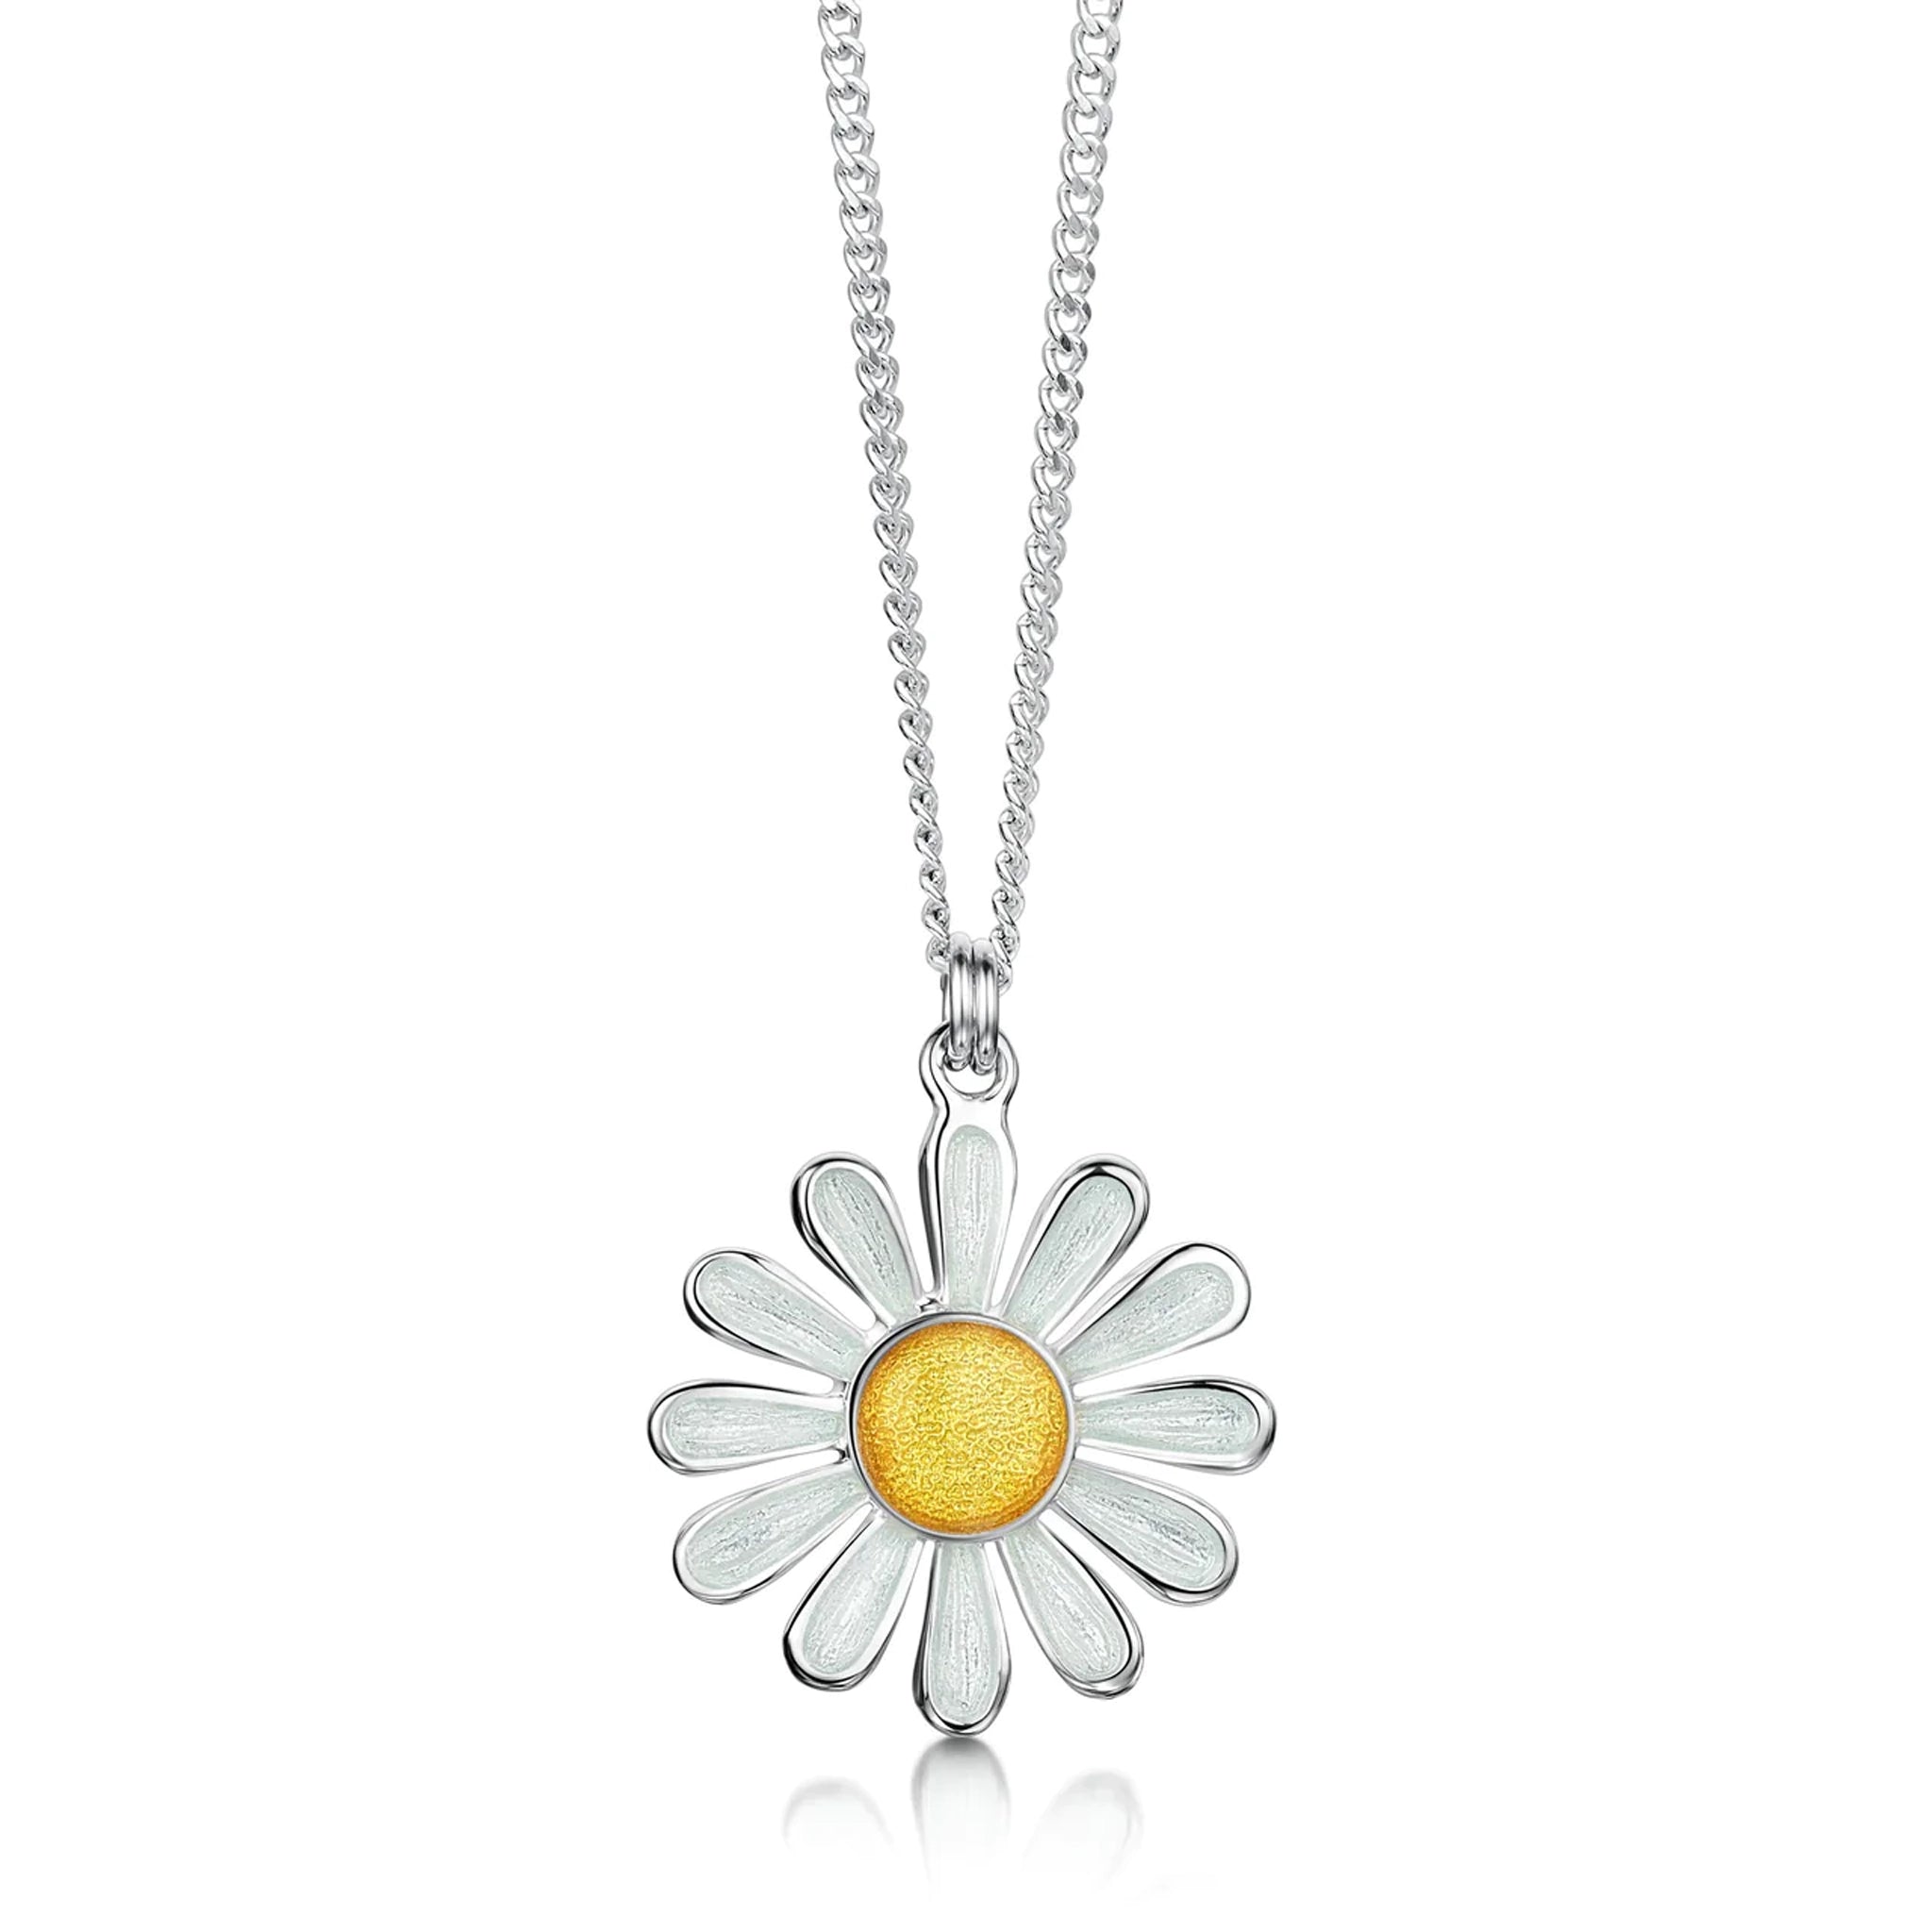 Polished silver daisy pendant in yellow and white enamel with a silver chain